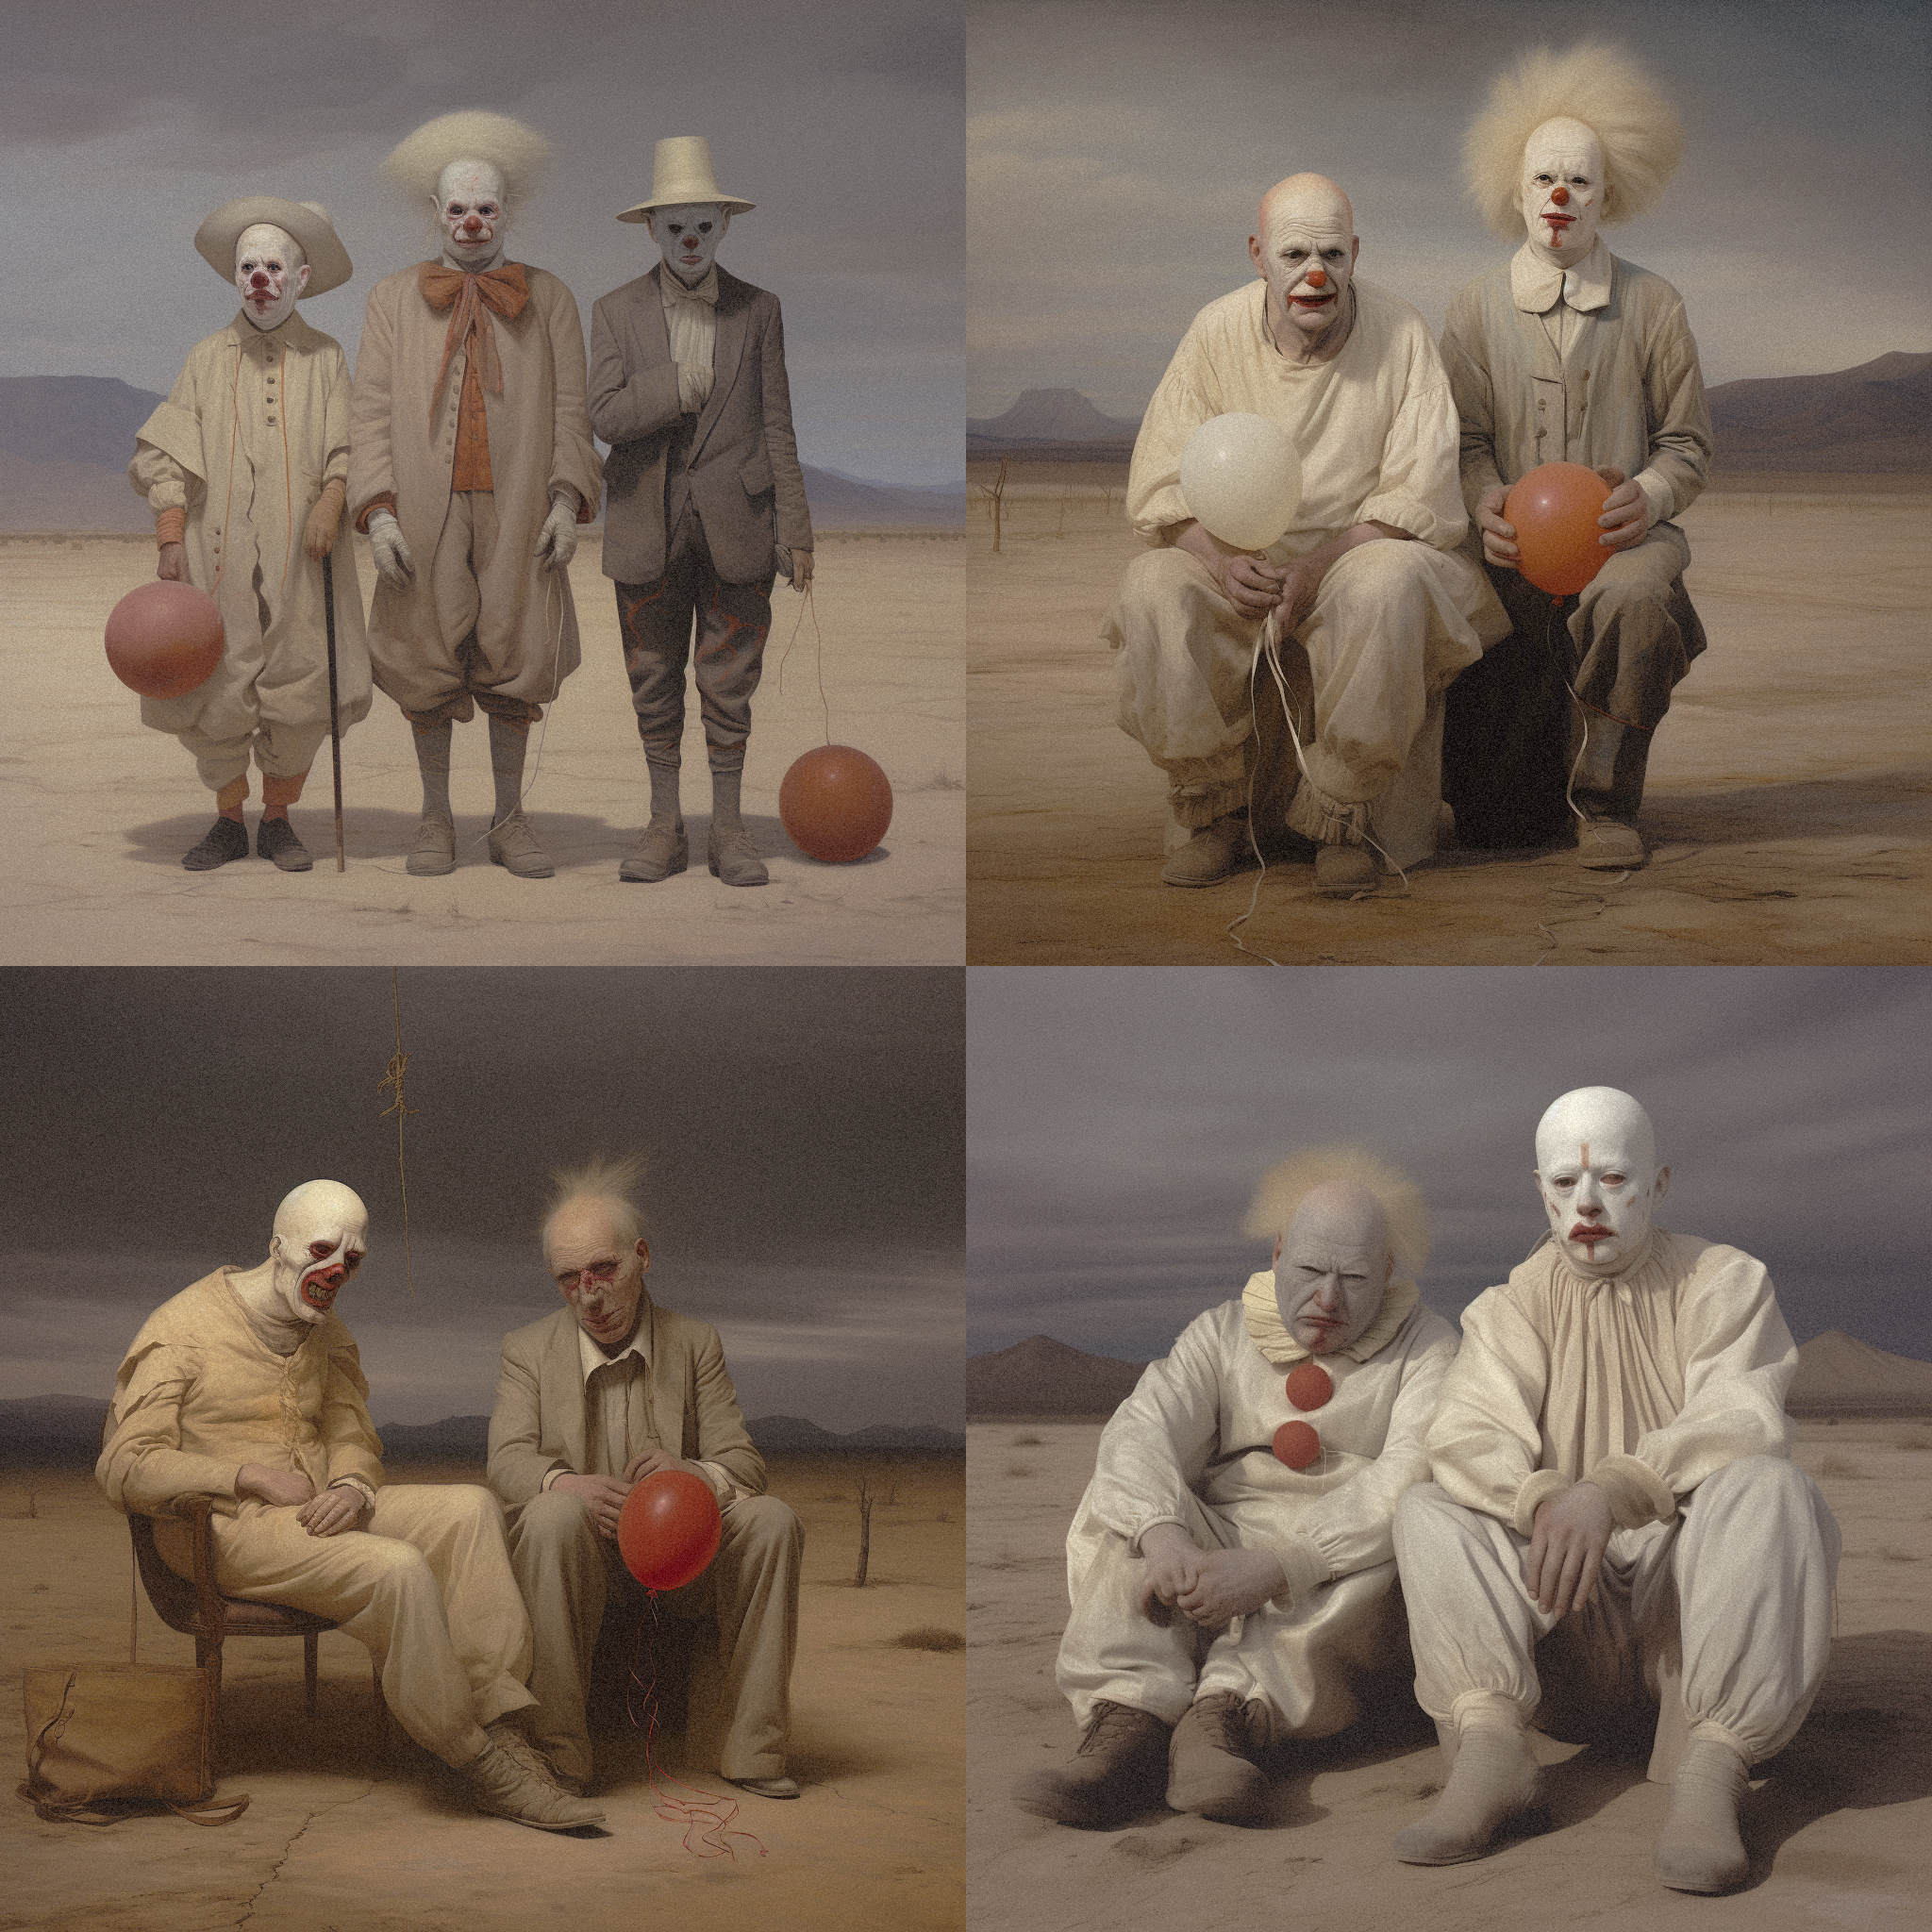 candiman_one_old_gracias_in_style_of_Odd_Nerdrum_clowns_in_a_d_a74a687f-0a1a-45f1-8eb3-e4819bcacbc0